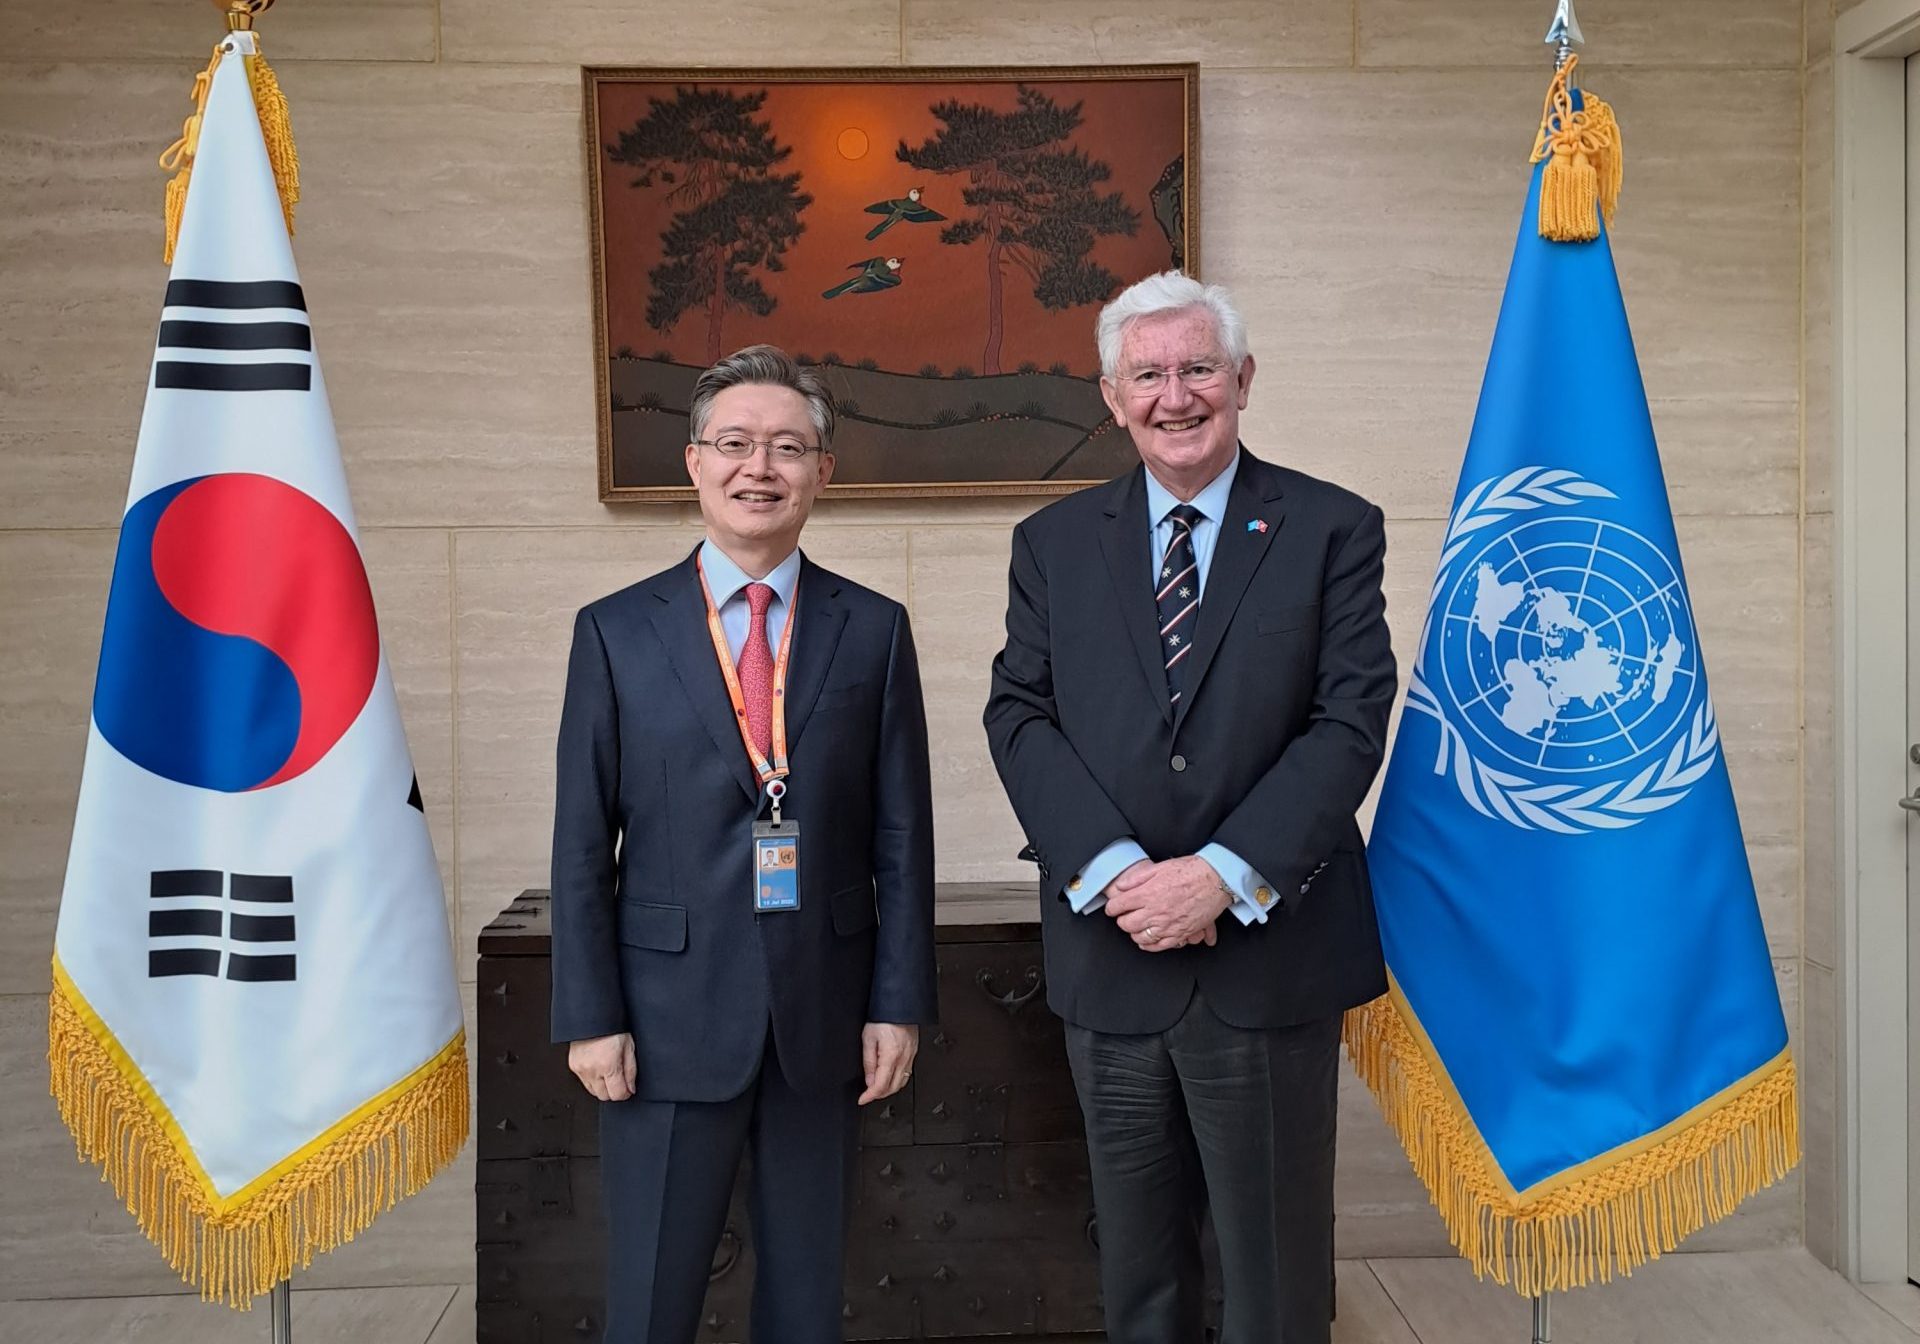 H.E. Ambassador Beresford-Hill is welcomed by H. E. Ambassador Joonkook Hwang, Permanent Representative of the Republic of Korea to the United Nations